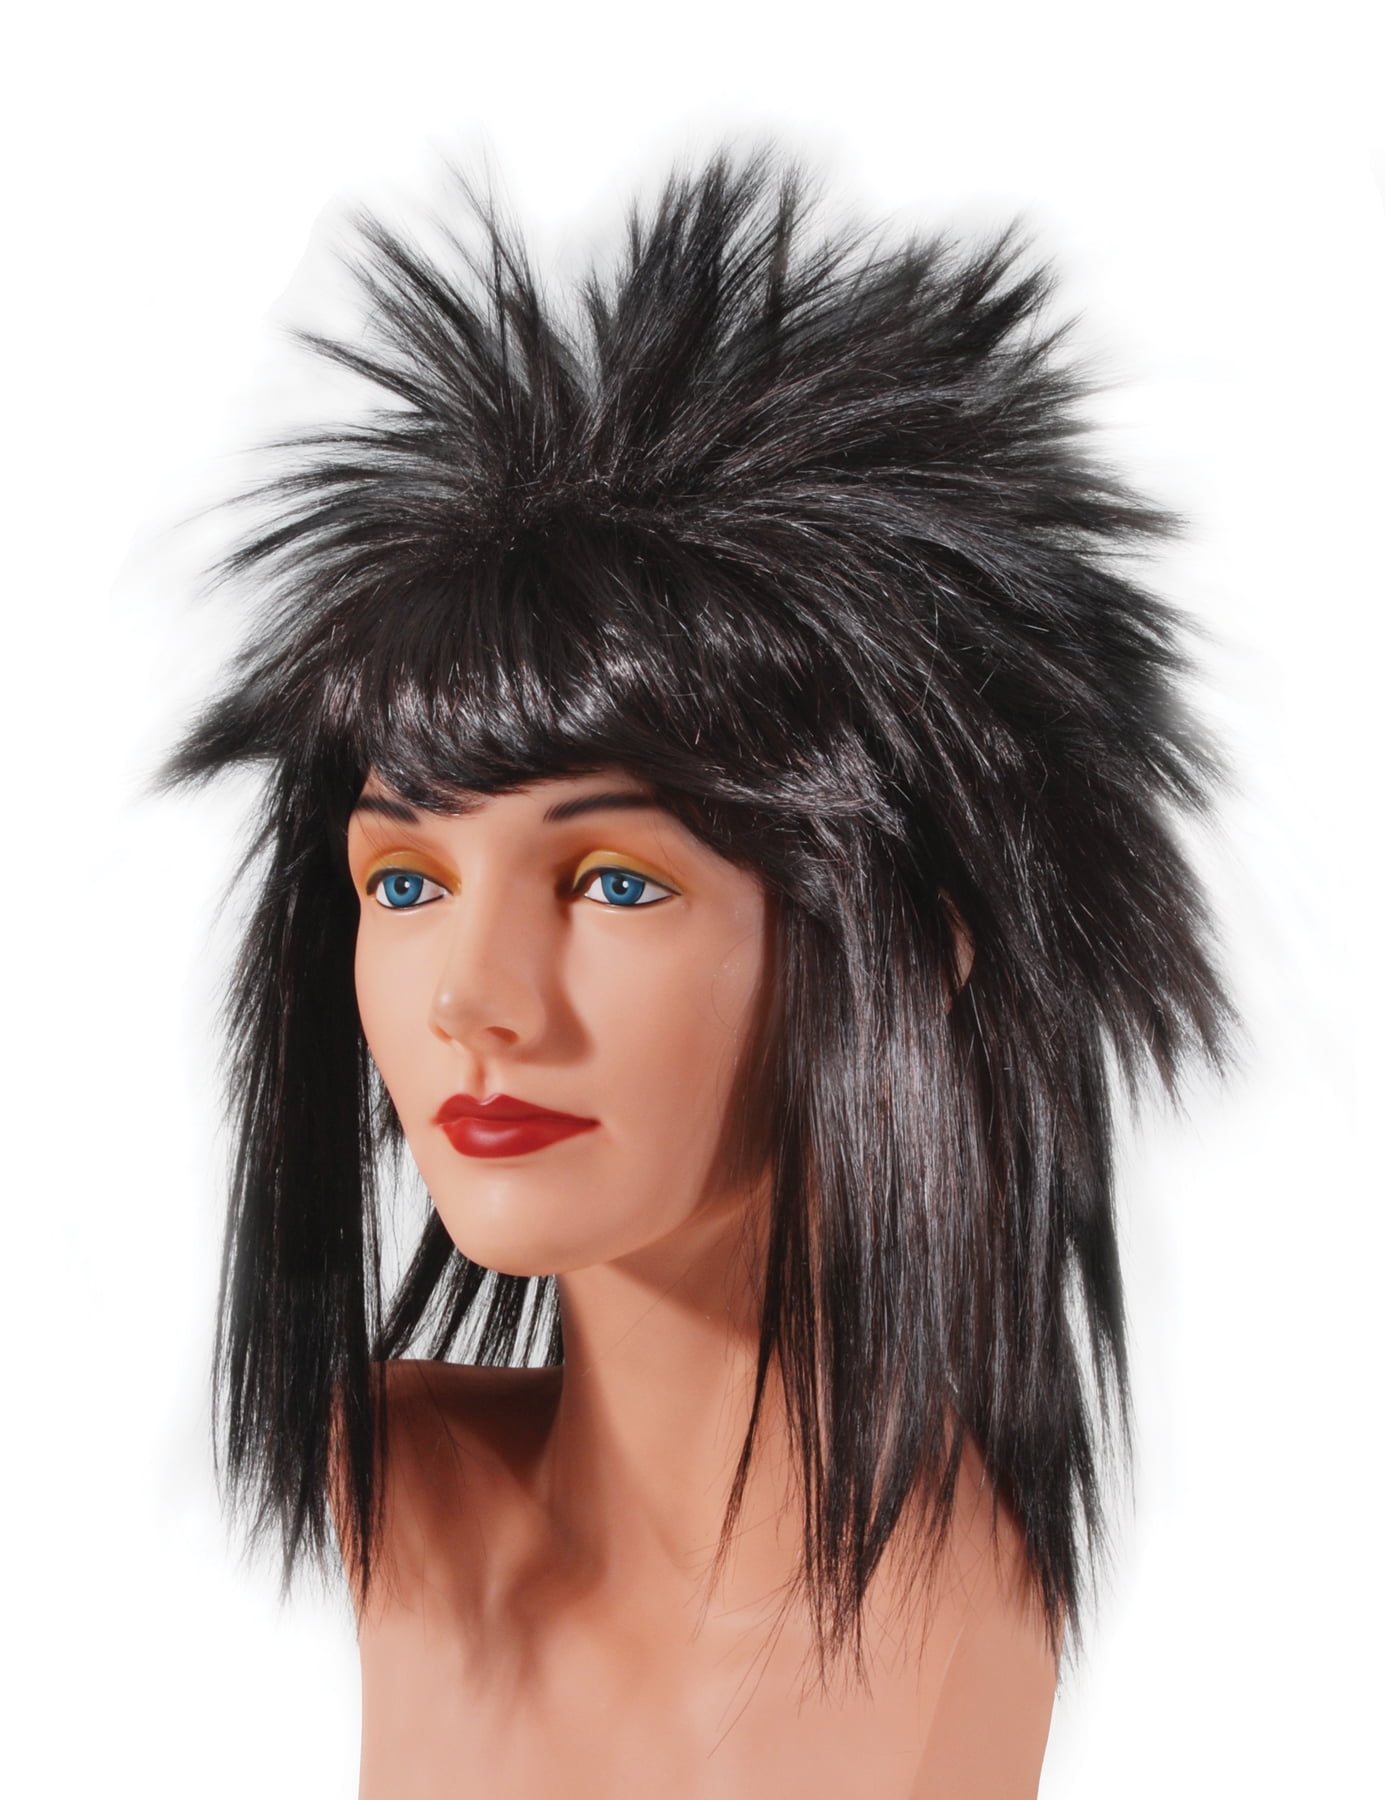 Red and Black Tall Red & Black Spikey Wig Devil Punky Wig Halloween 